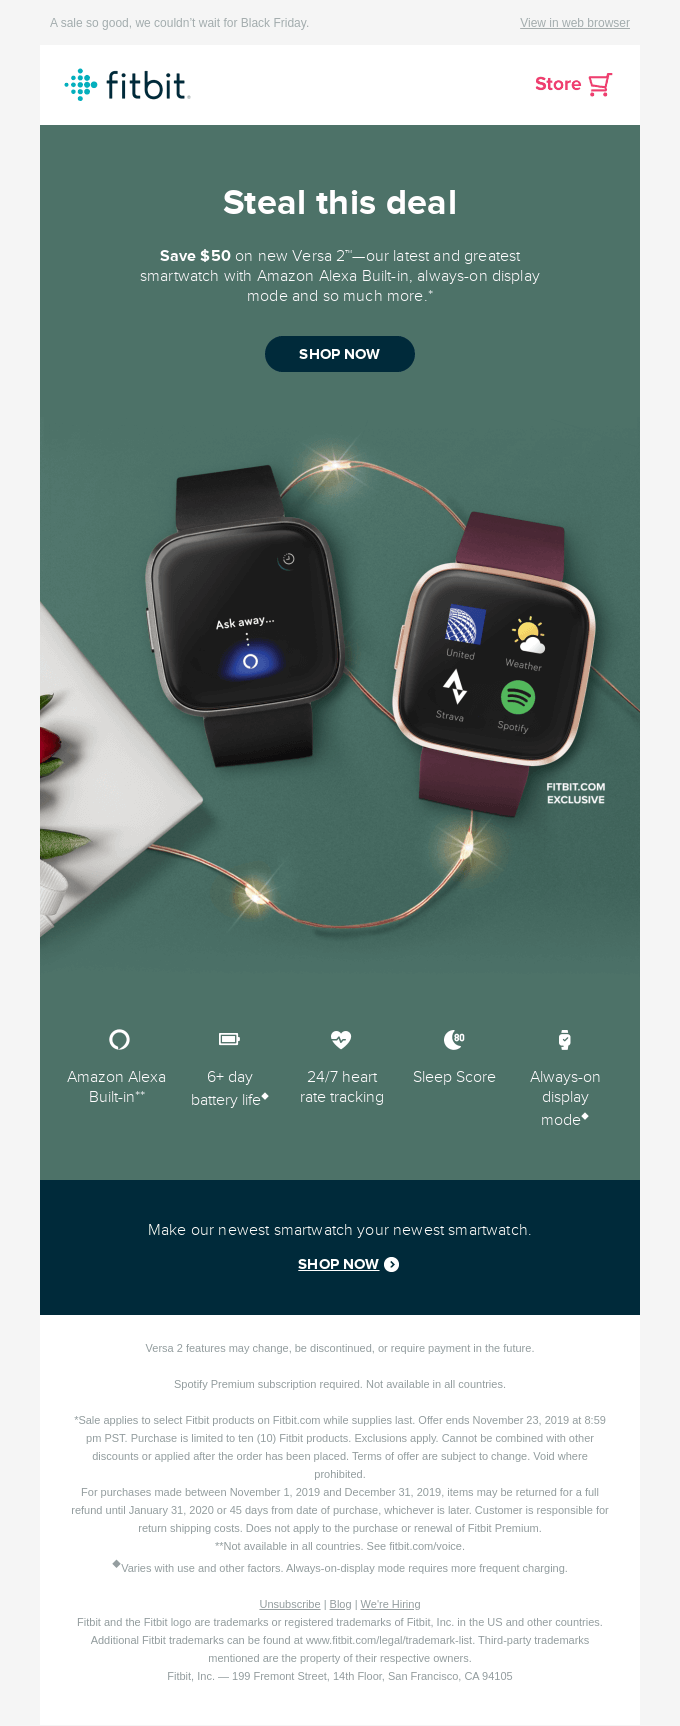  loyalty email from Fitbit